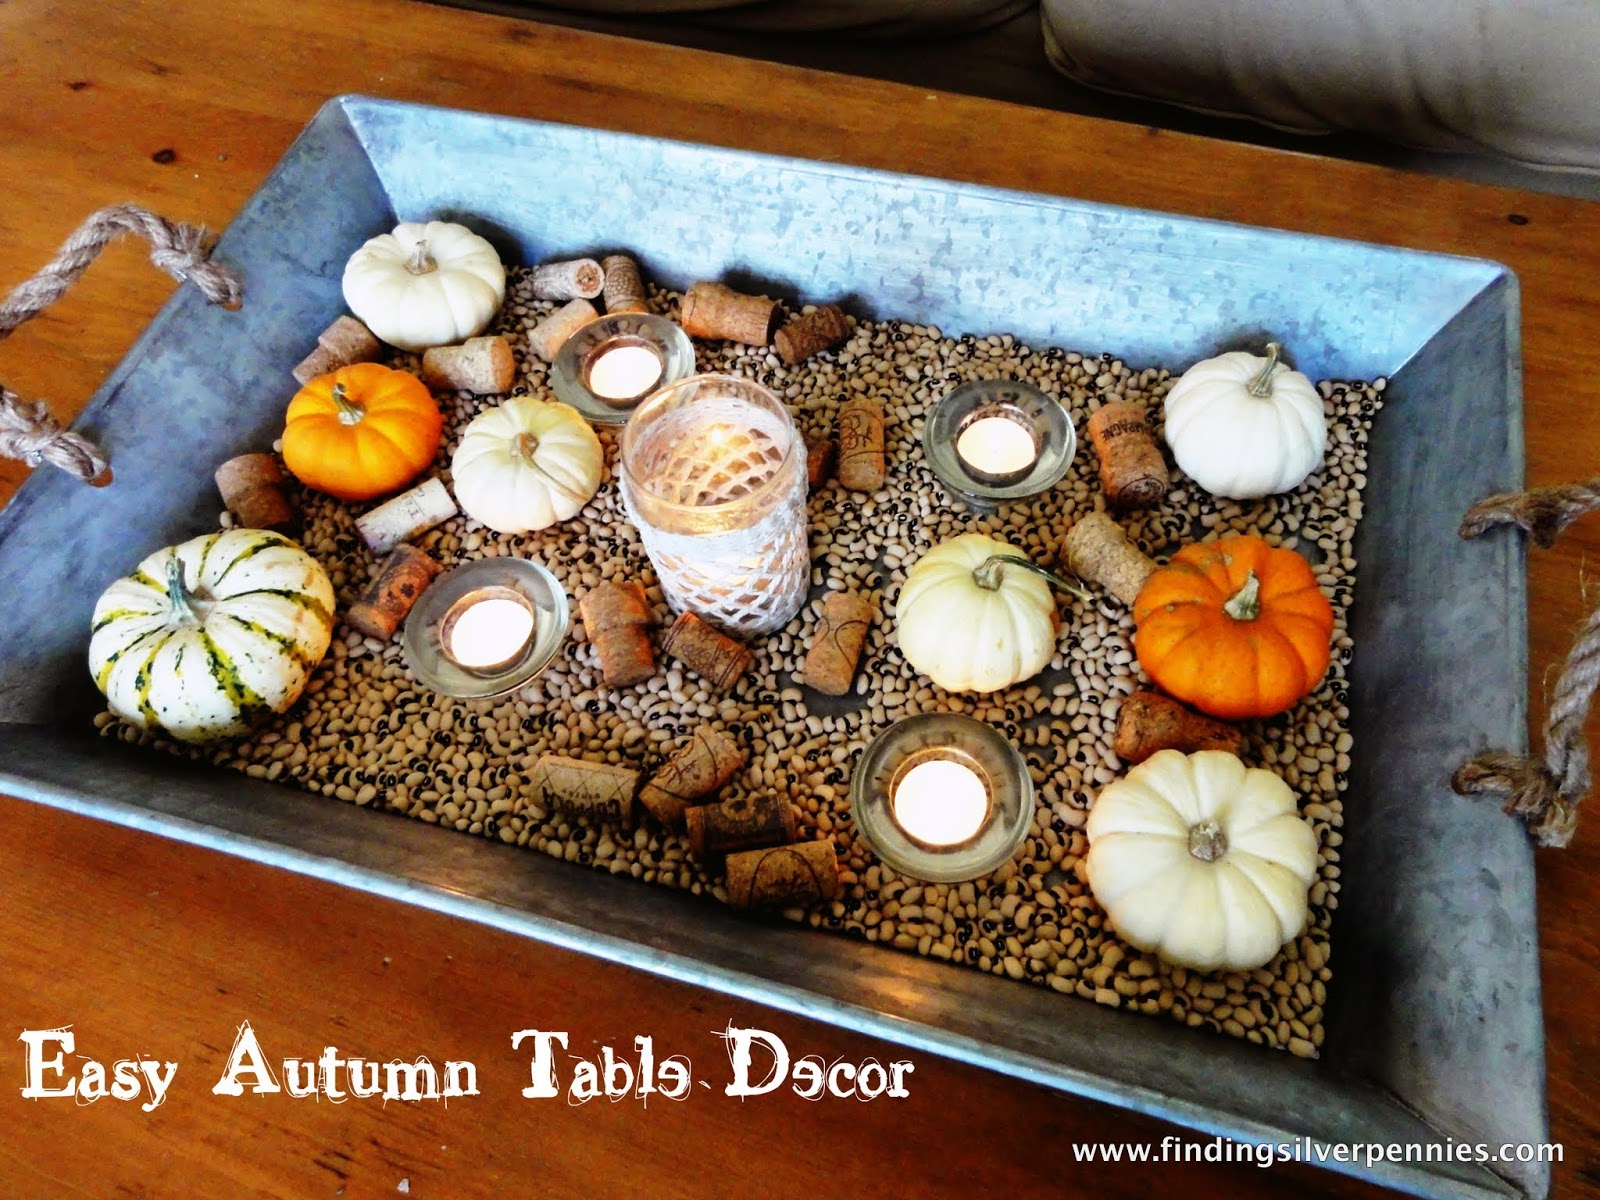 Fall Tray by Finding Silver Pennies - www.findingsilverpennies.com